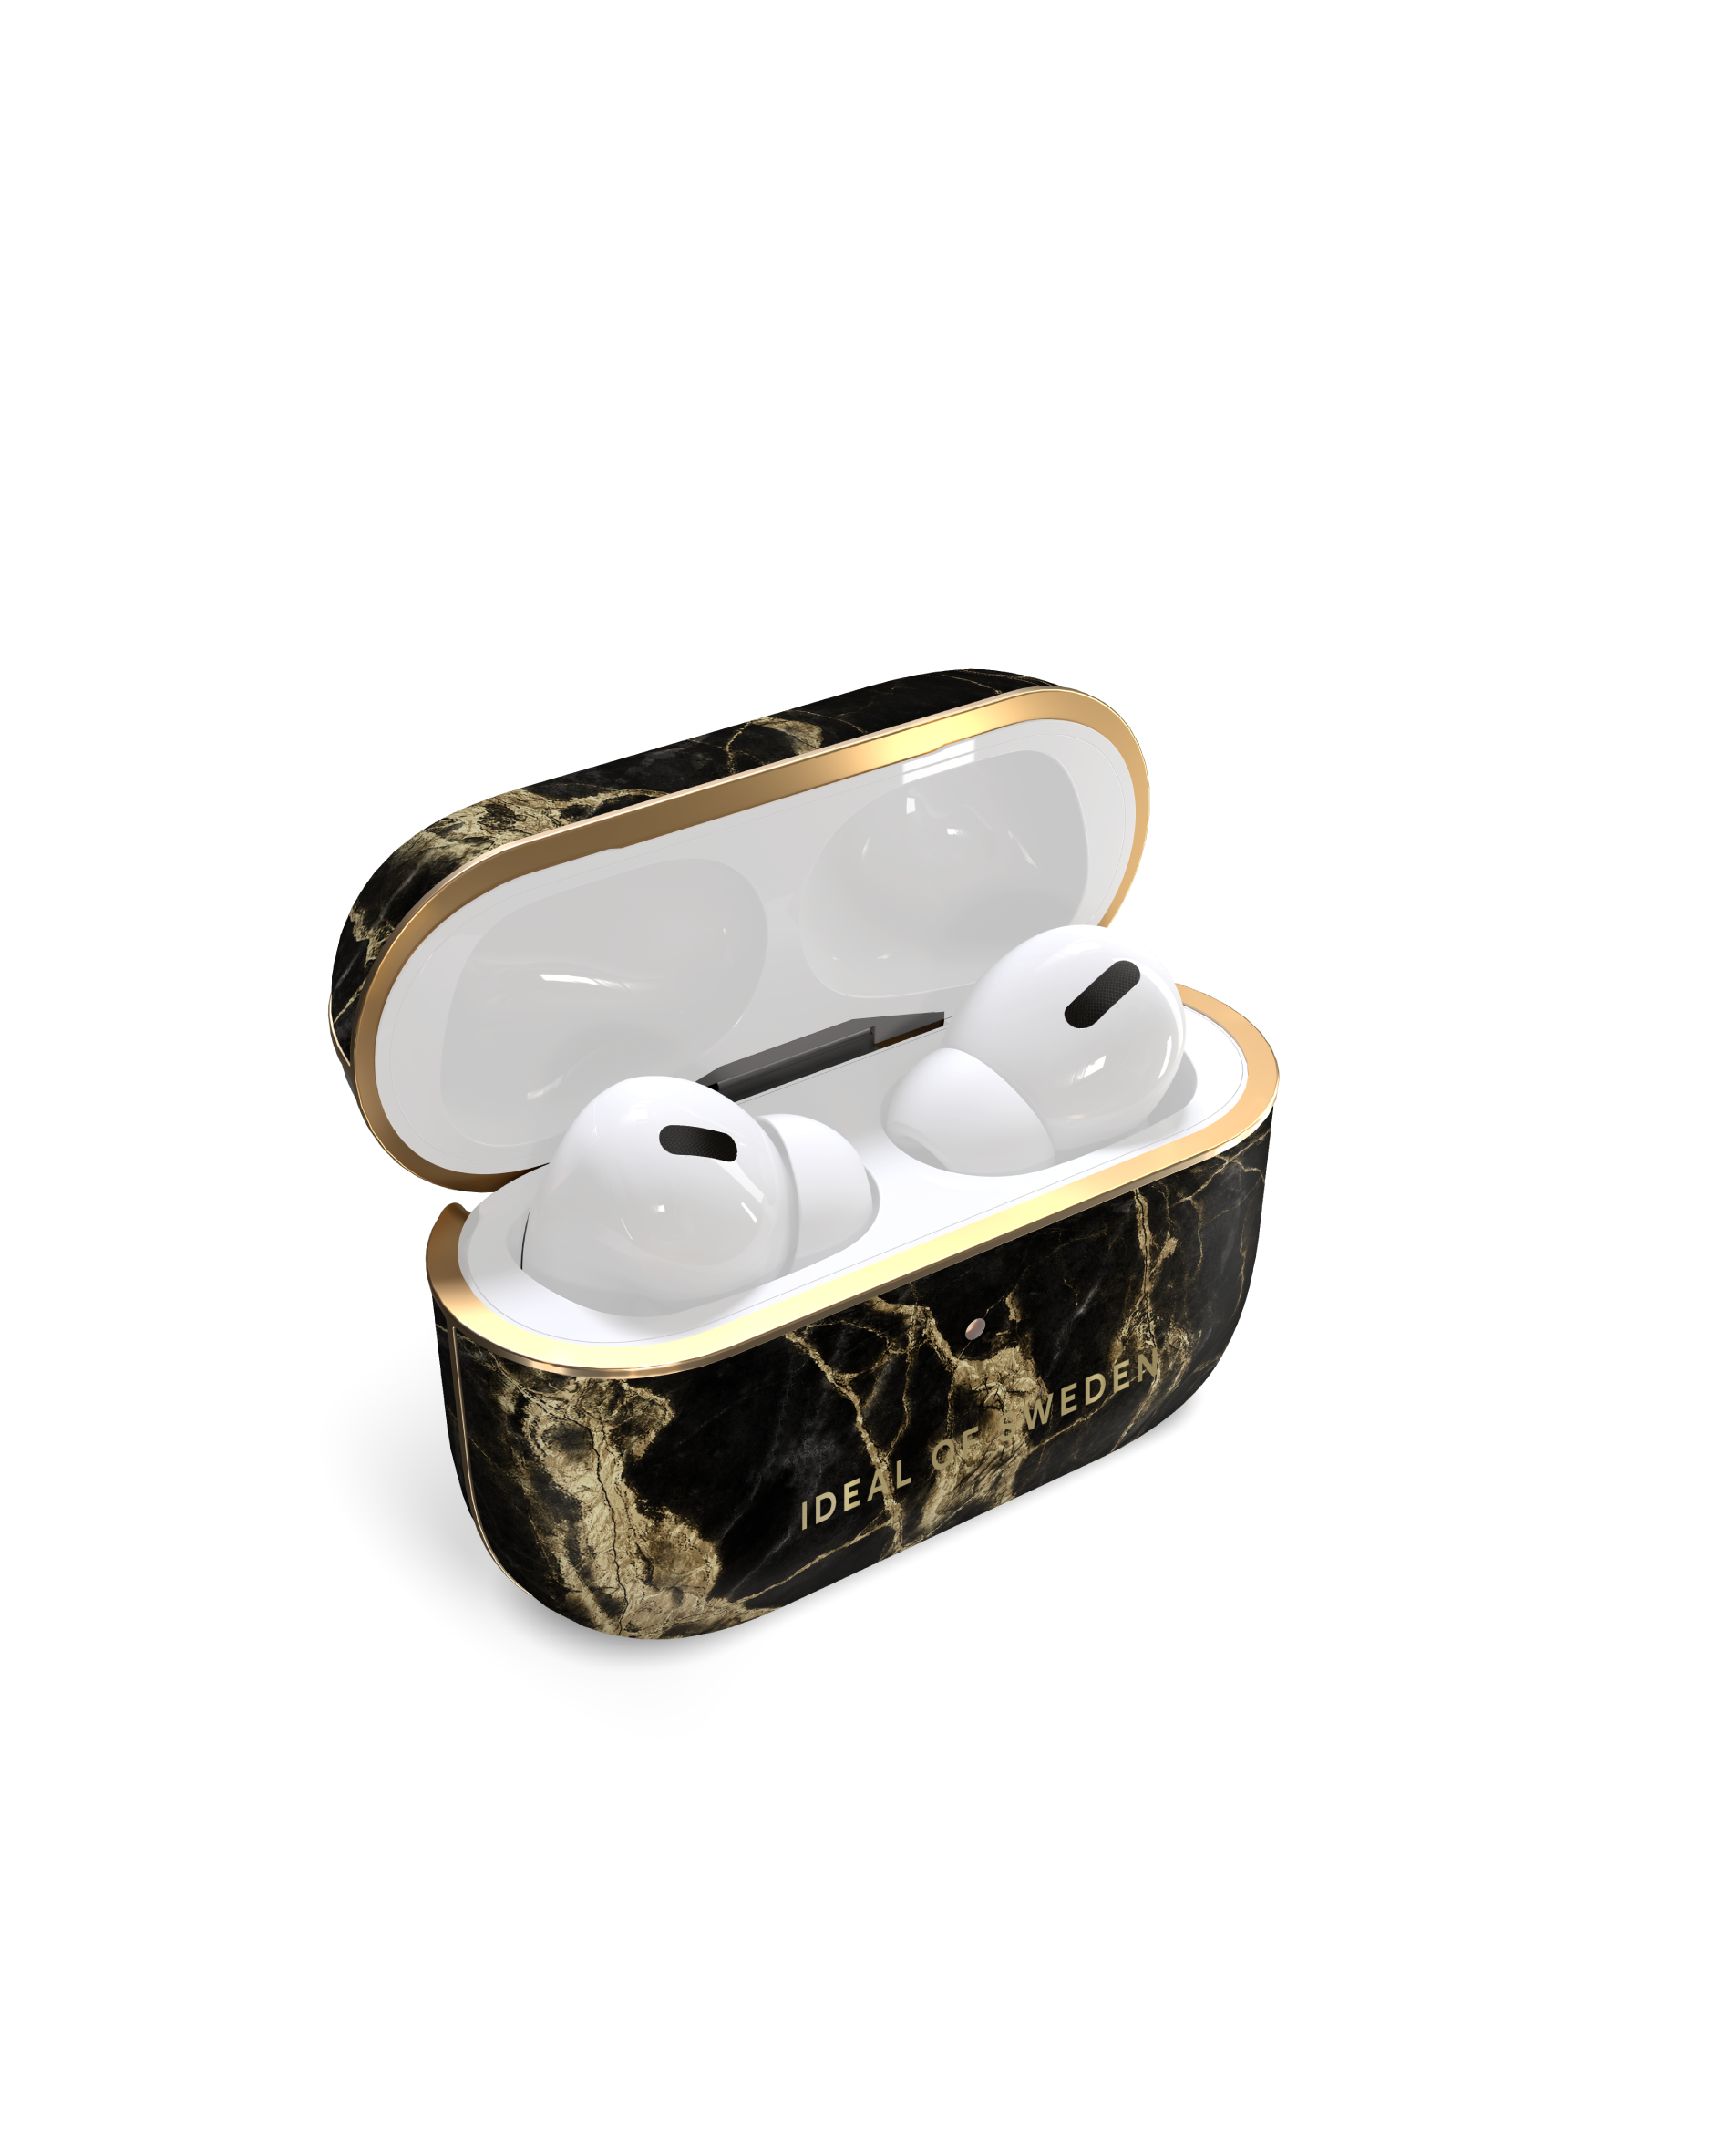 Case für: OF SWEDEN Marble Golden IDFAPC-PRO-191 IDEAL Smoke Full Apple passend Cover AirPod